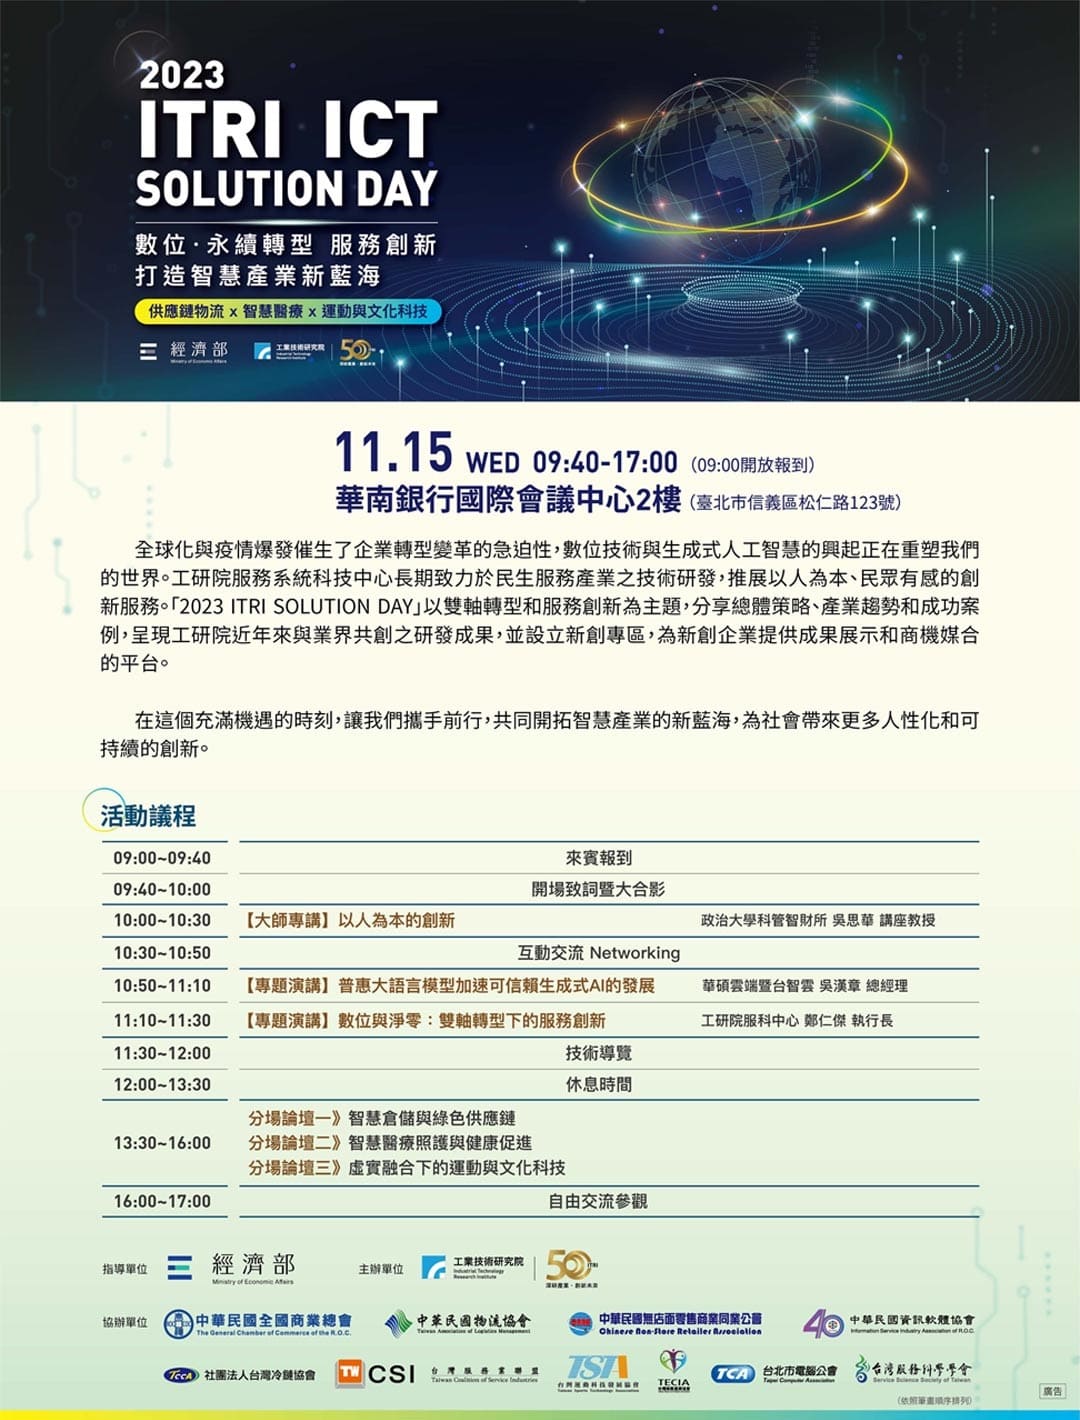 「2023 ITRI ICT SOLUTION DAY」活動，